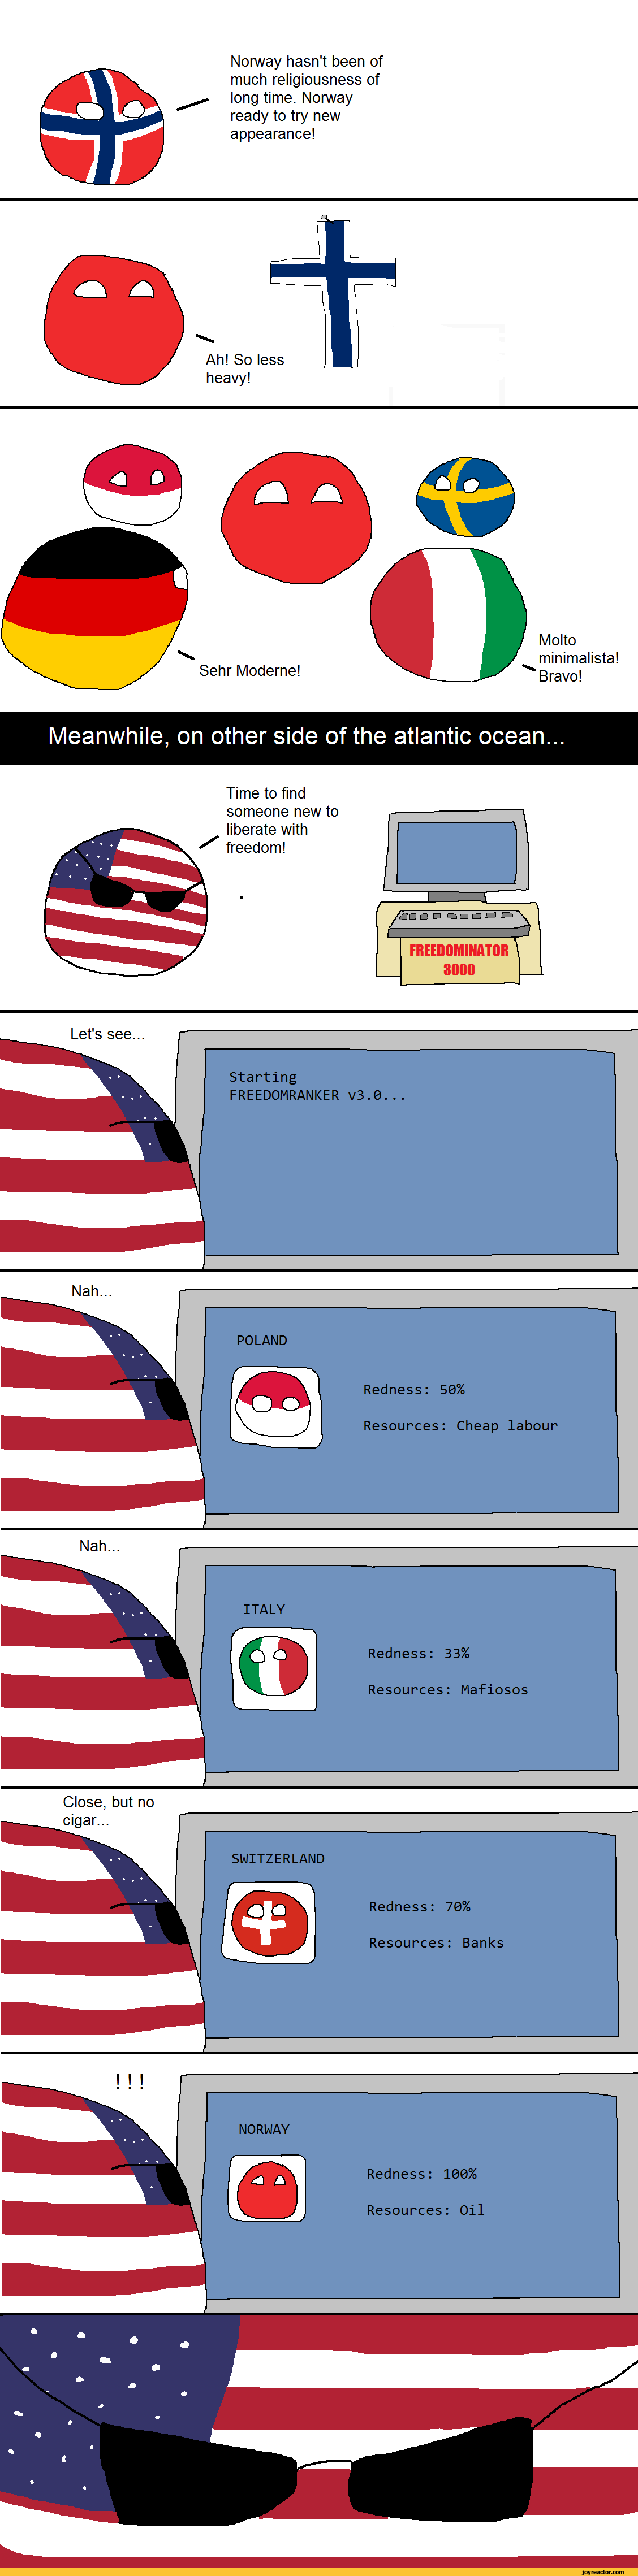 comics-countryballs-norway-countries-1015015.png